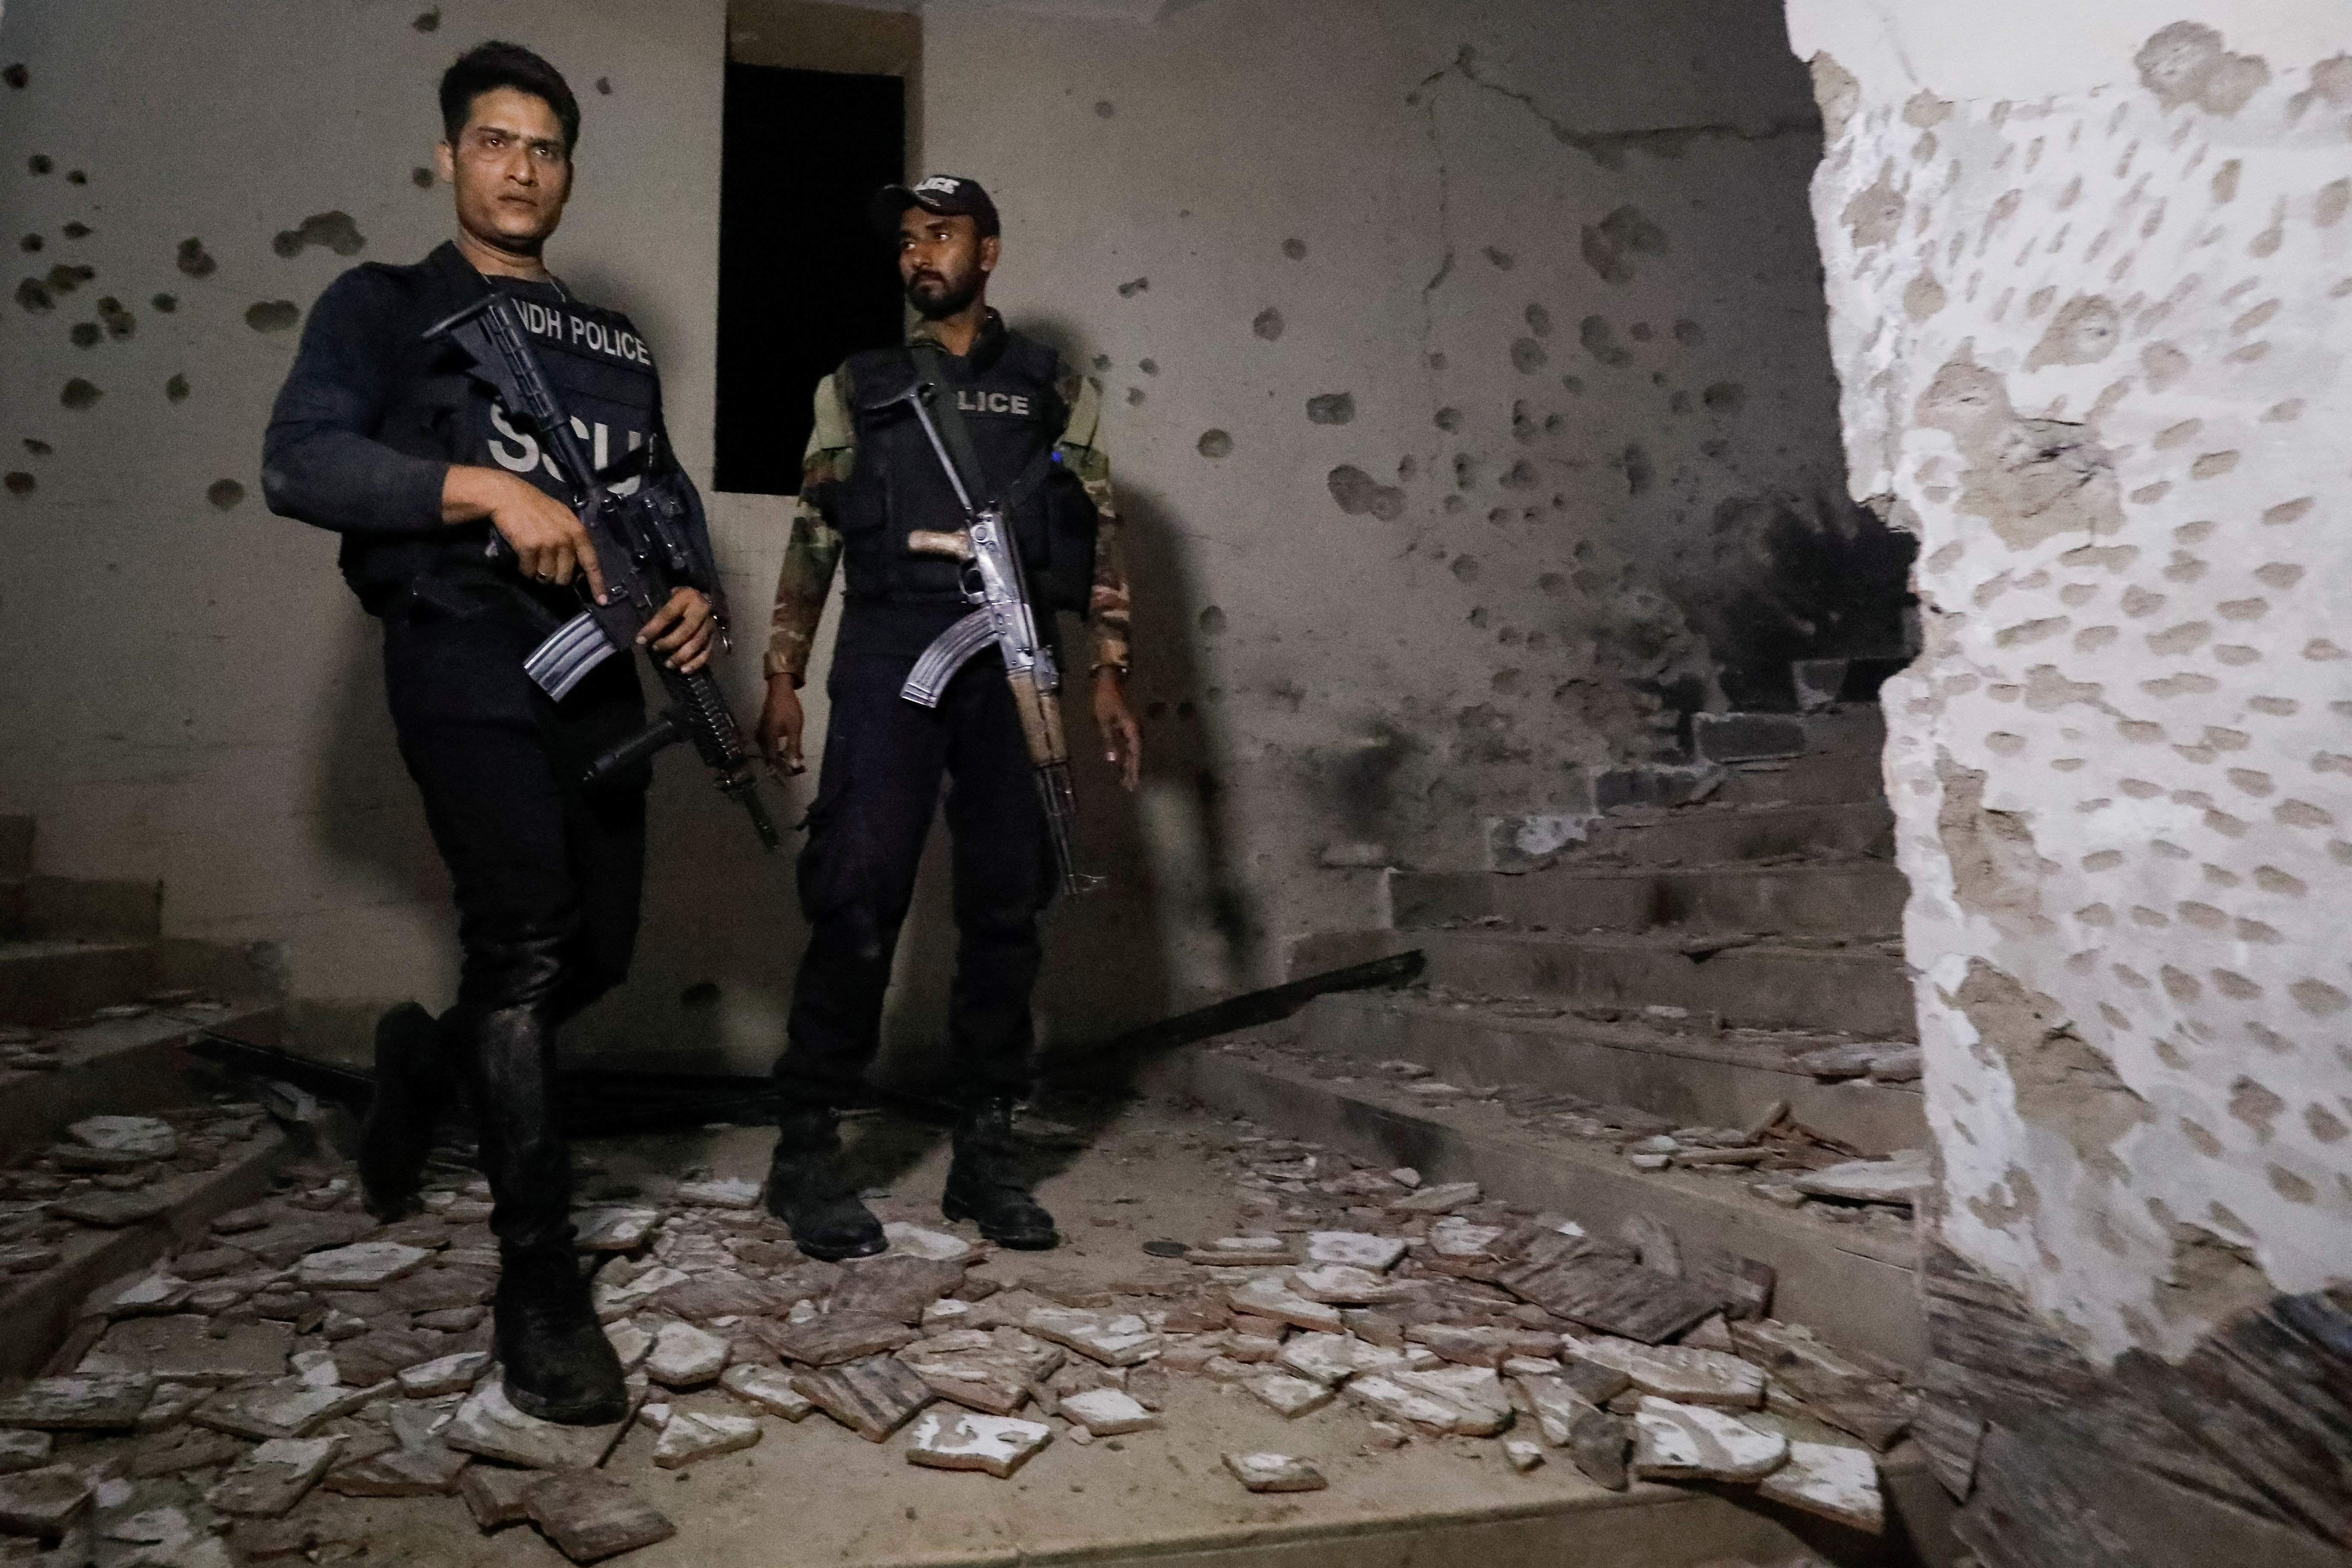 Police officers stand in the aftermath of an attack on a police station in Karachi